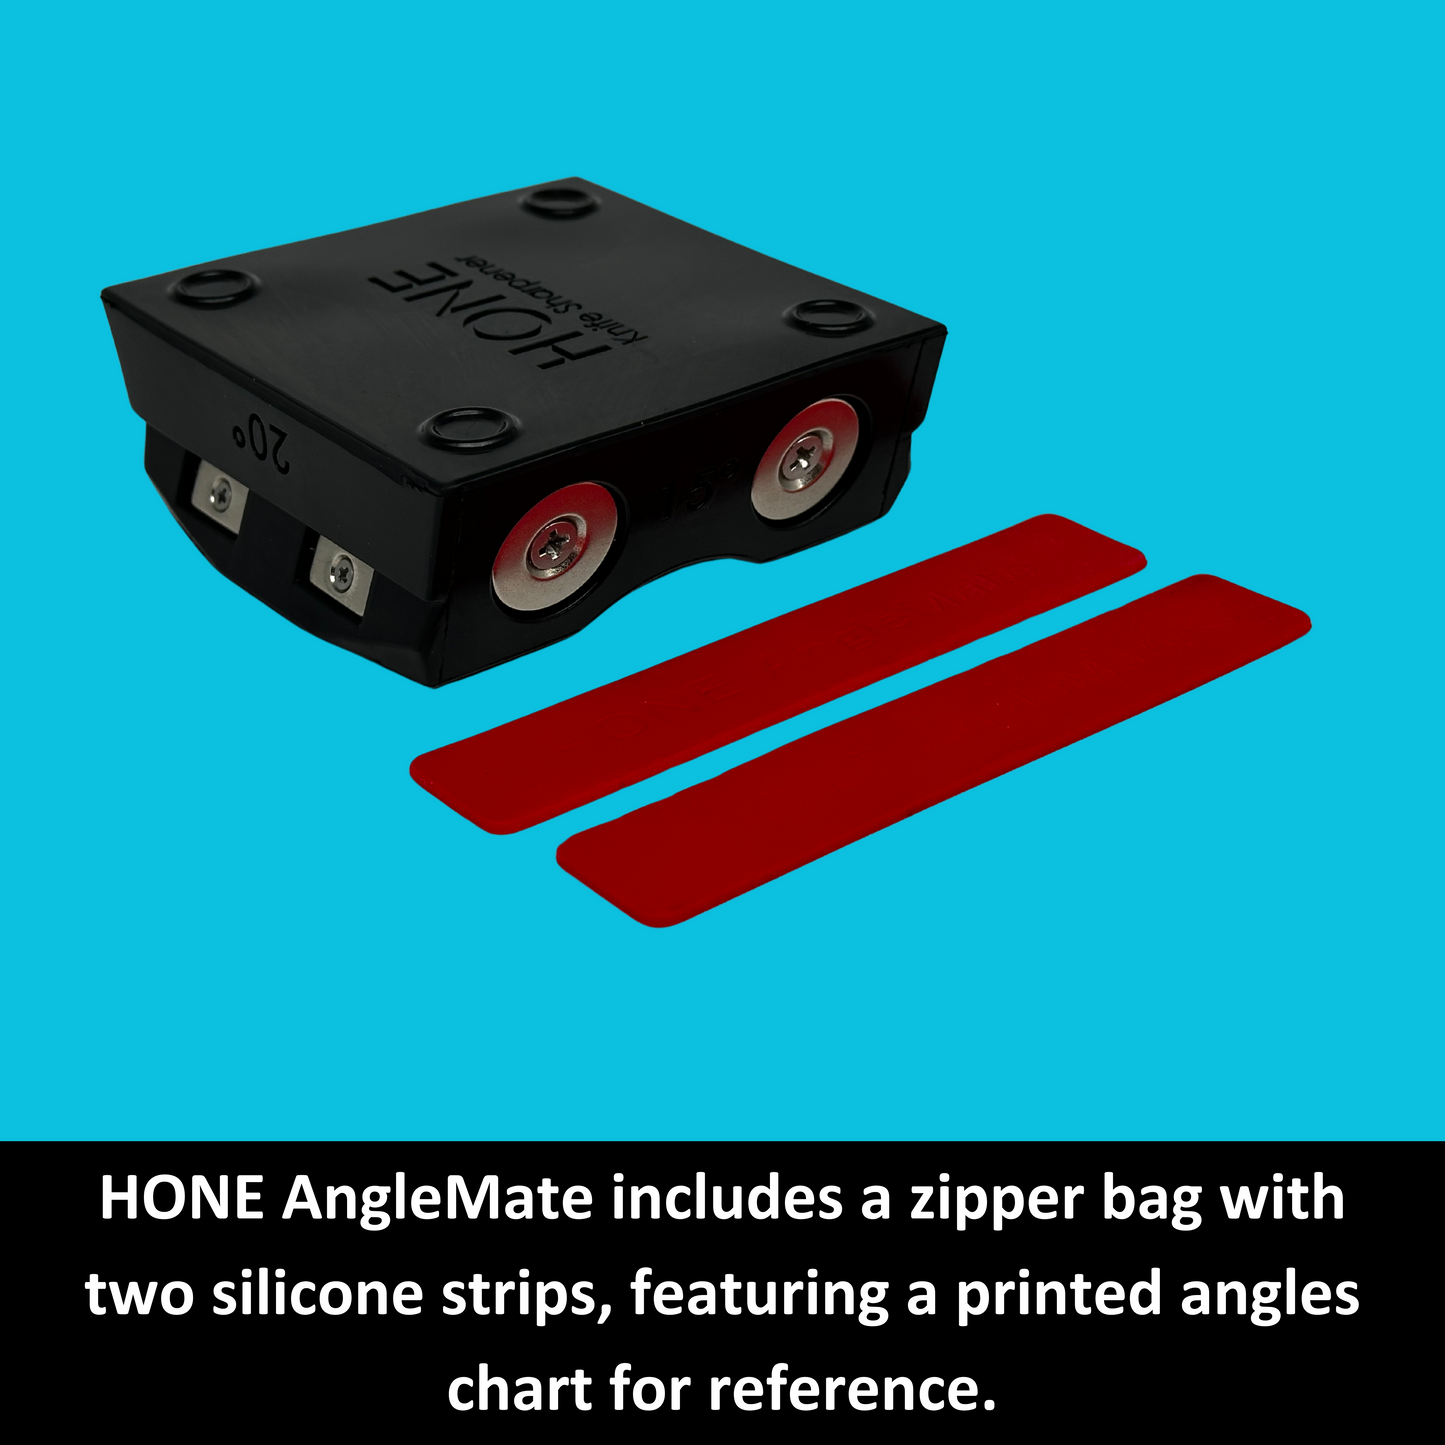 HONE AngleMate (Knife Holder shown for display only, not included in the package)